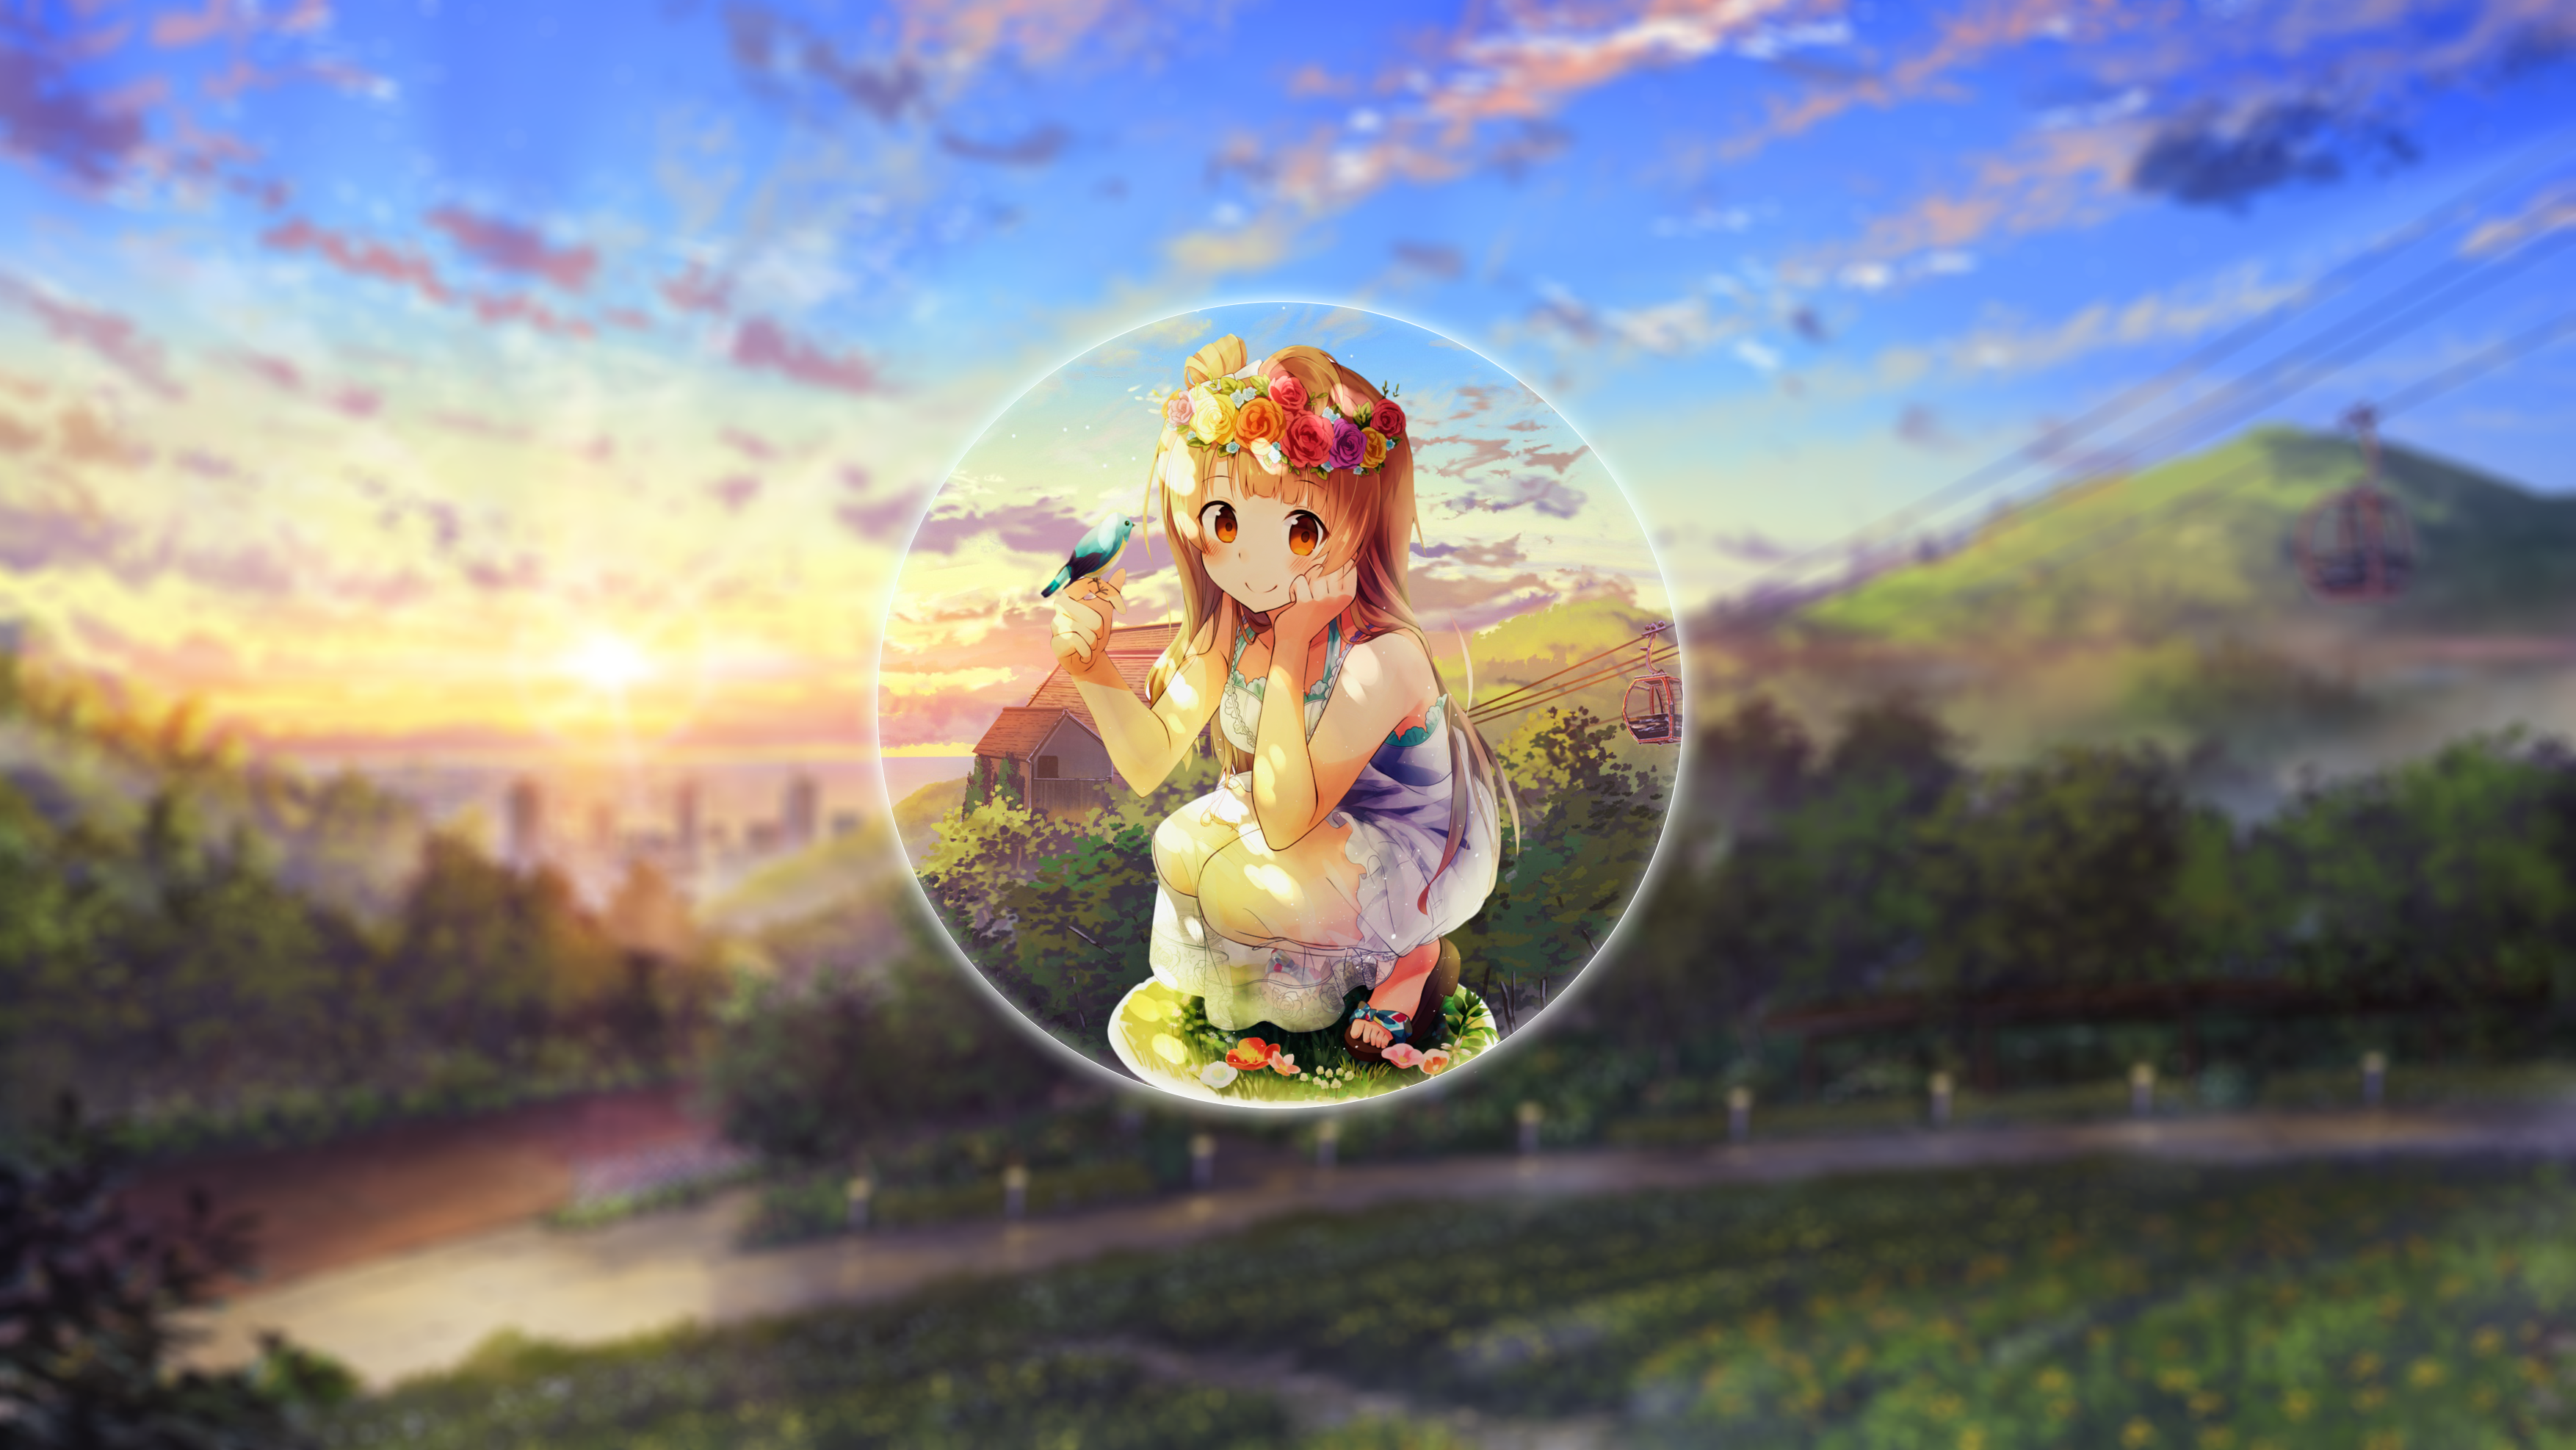 Anime 3508x1974 anime anime girls nature Minami Kotori Love Live! picture-in-picture summer evening flower in hair birds 2D